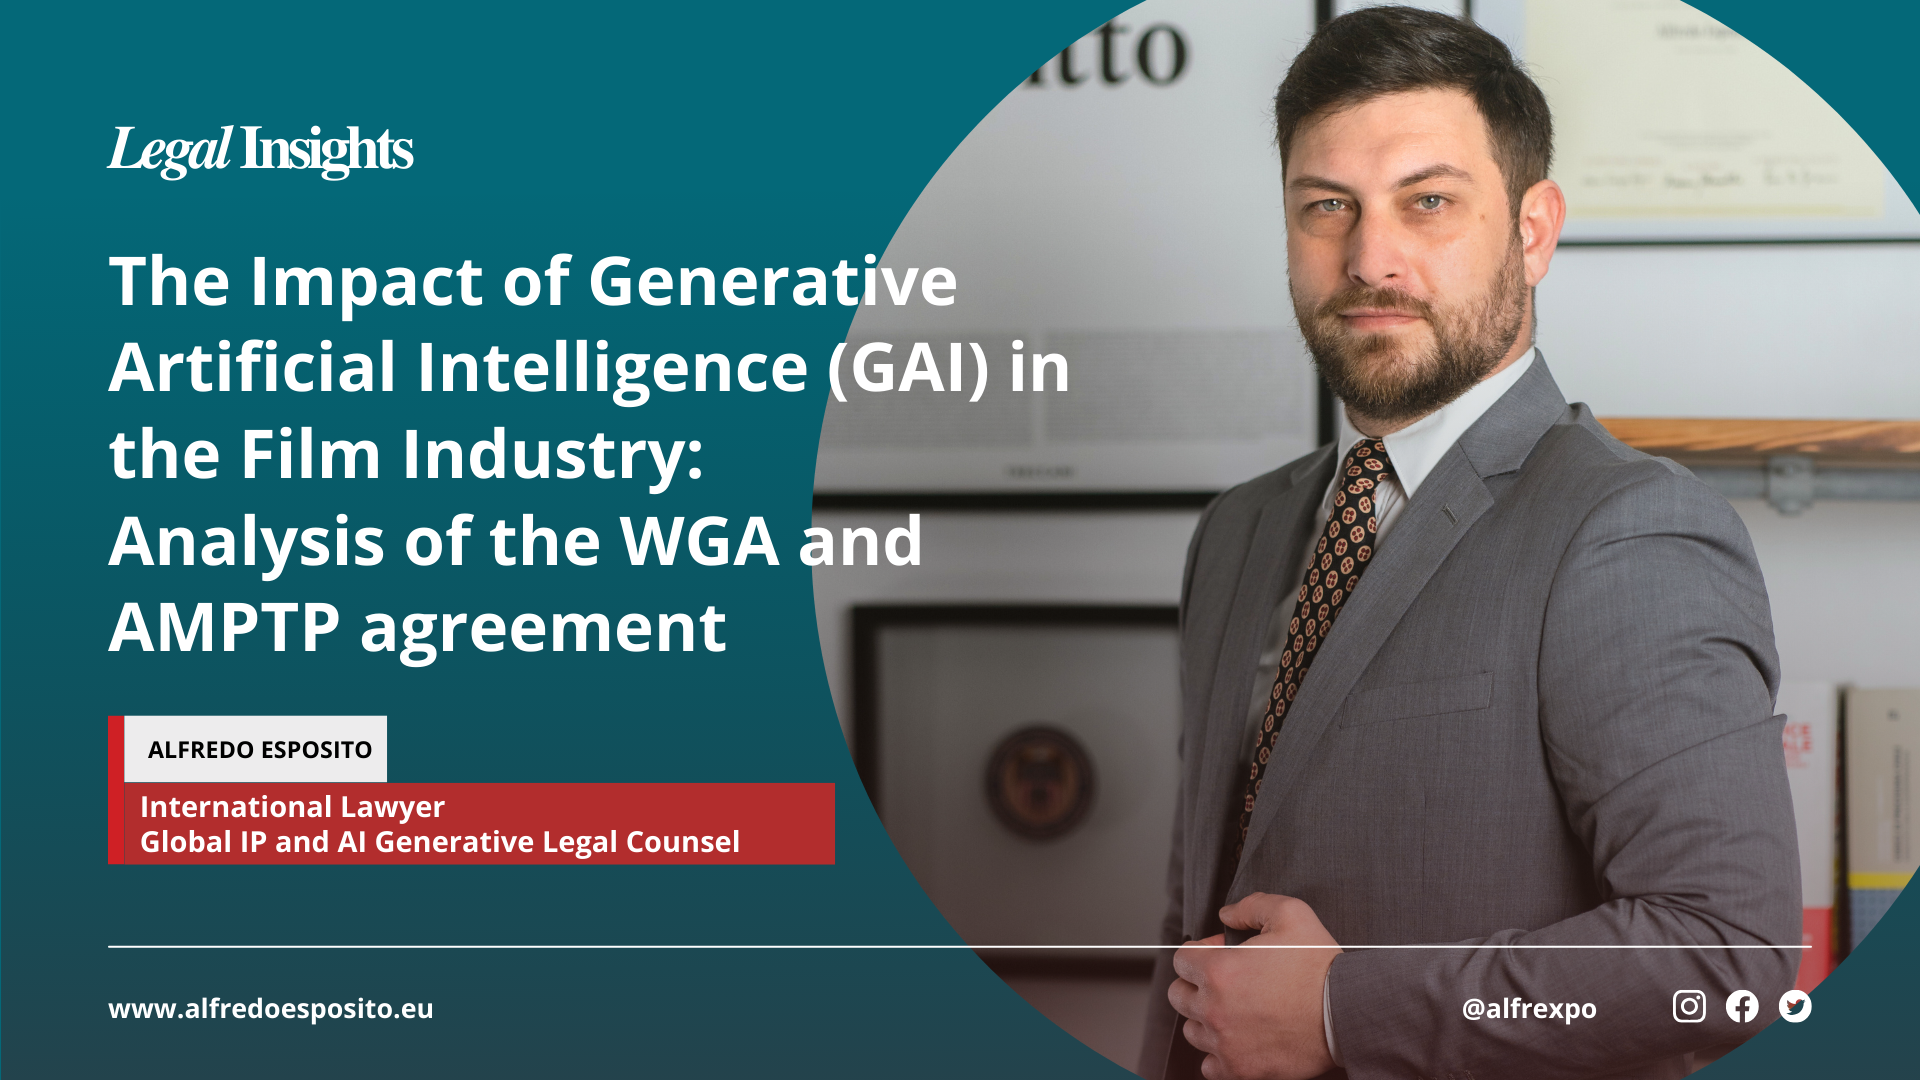 The Impact of Generative Artificial Intelligence (GAI) in the Film Industry: Analysis of the WGA and AMPTP Agreement